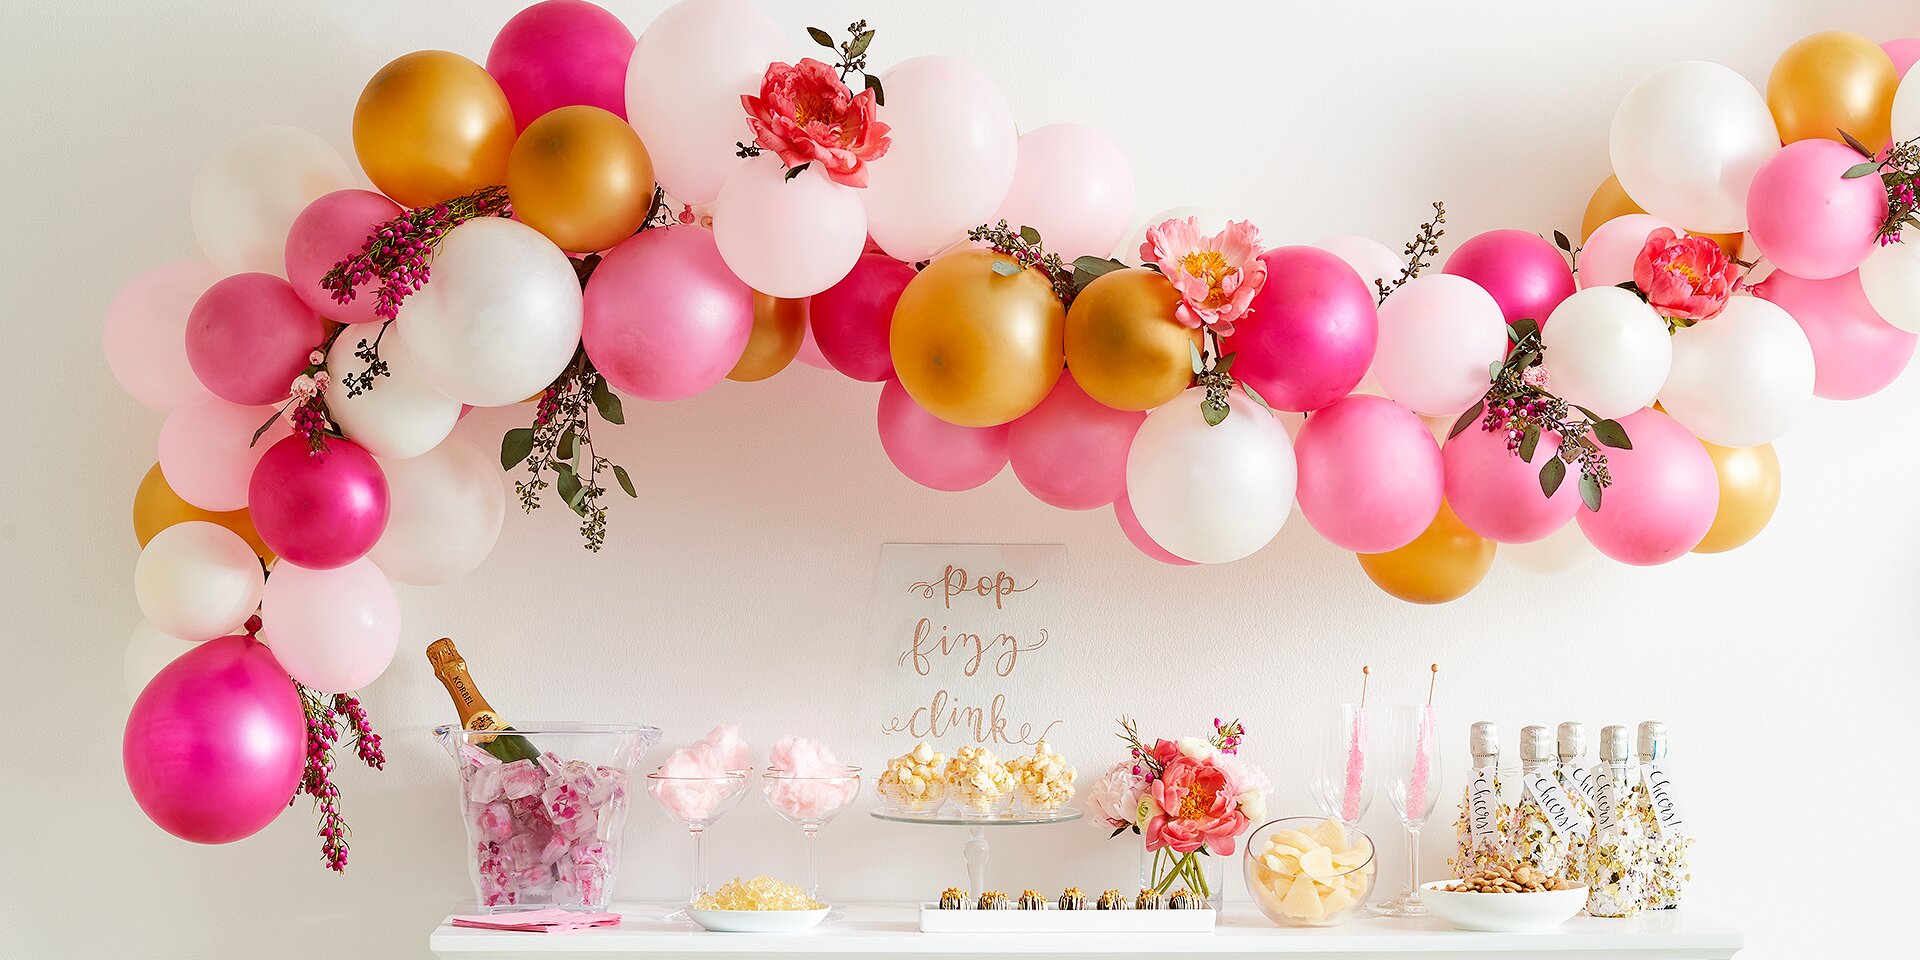 Learn how to make a balloon arch at home